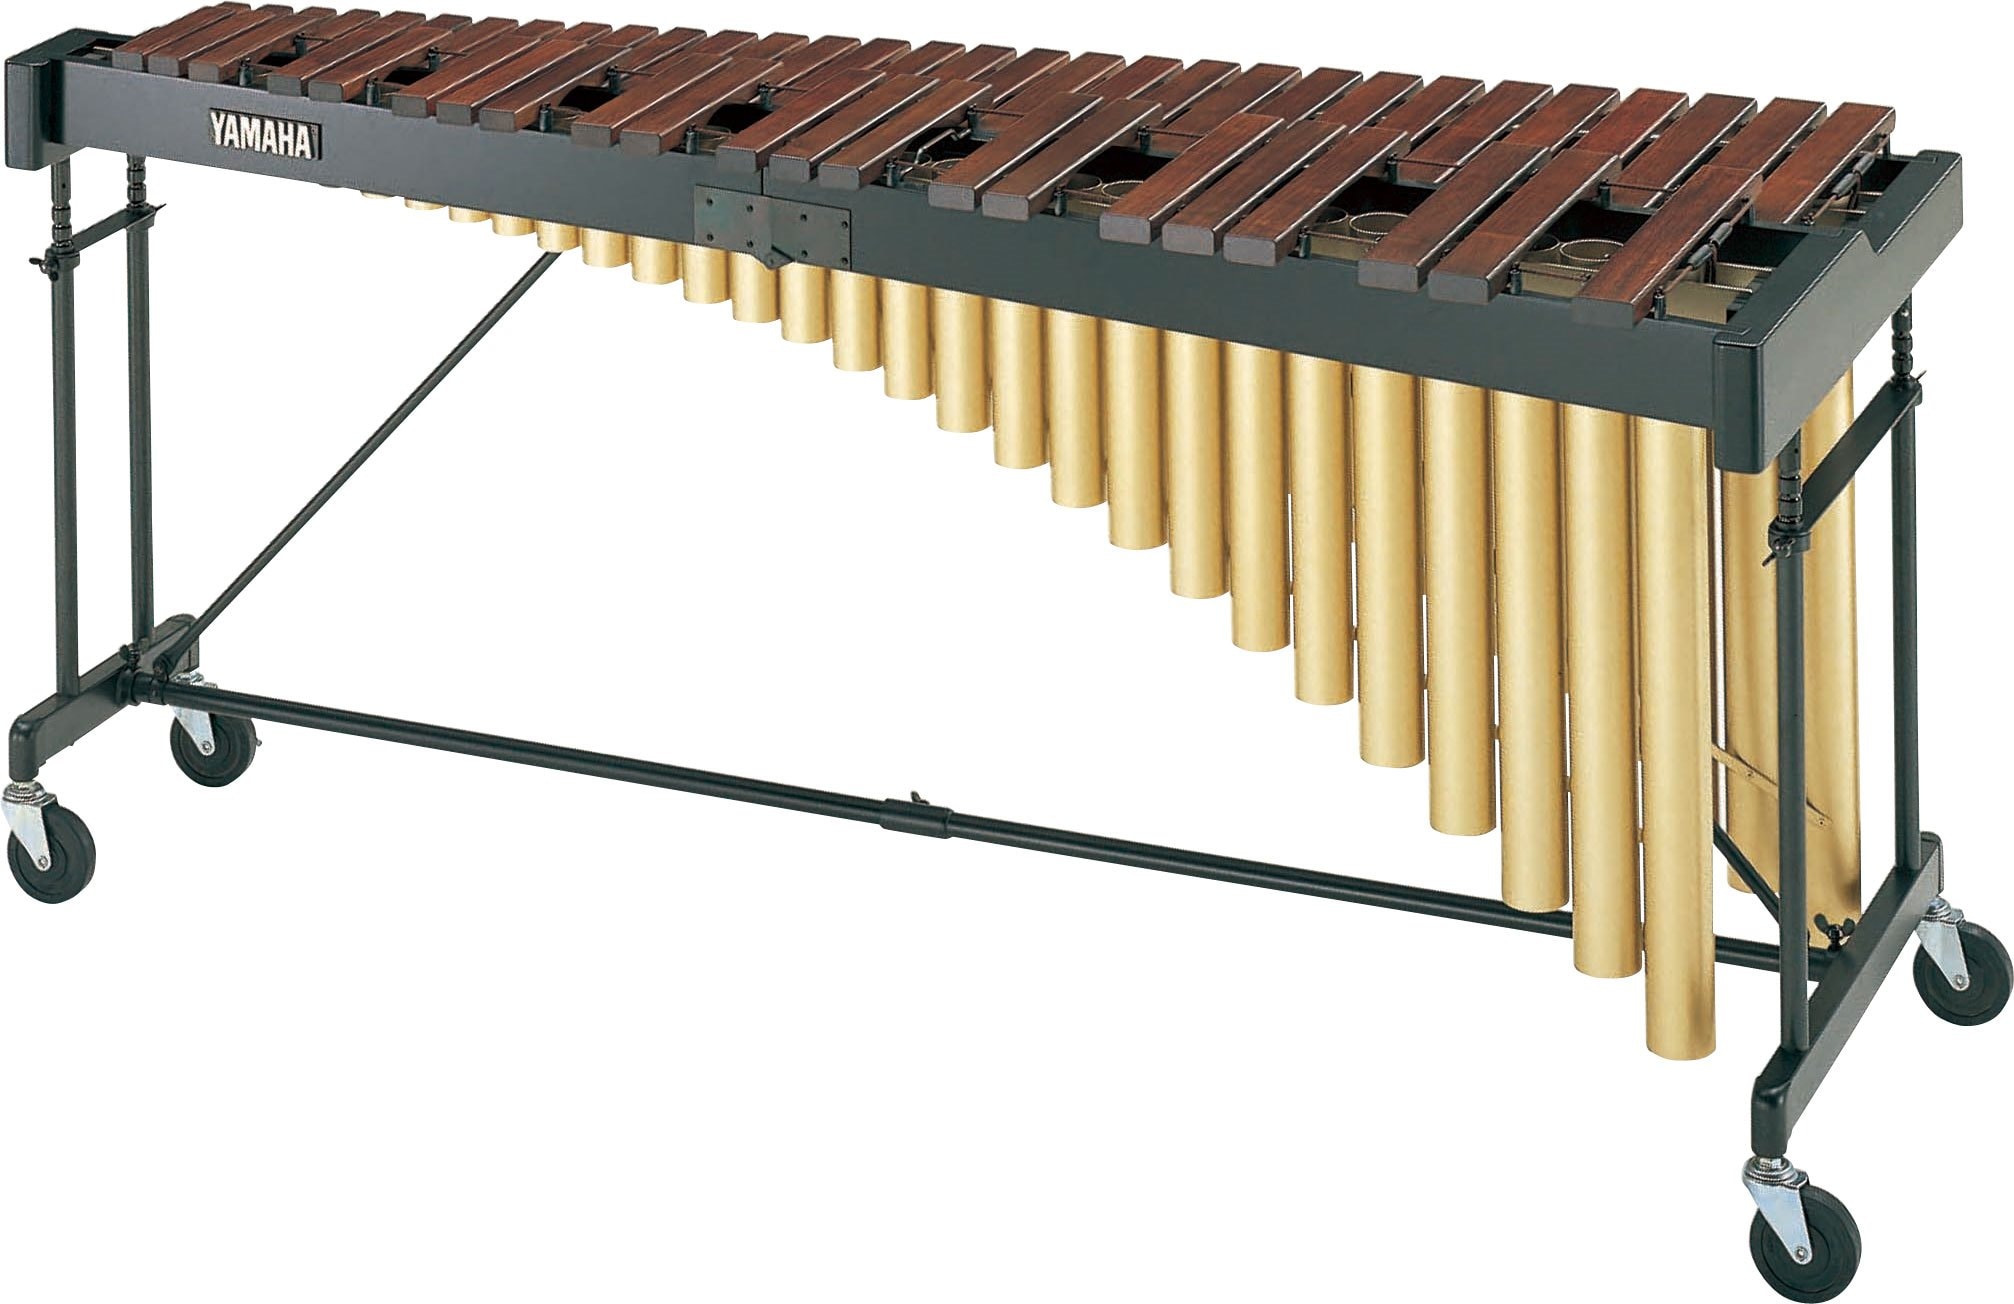 YM-2400 - Overview - Marimbas - Percussion - Musical Instruments 